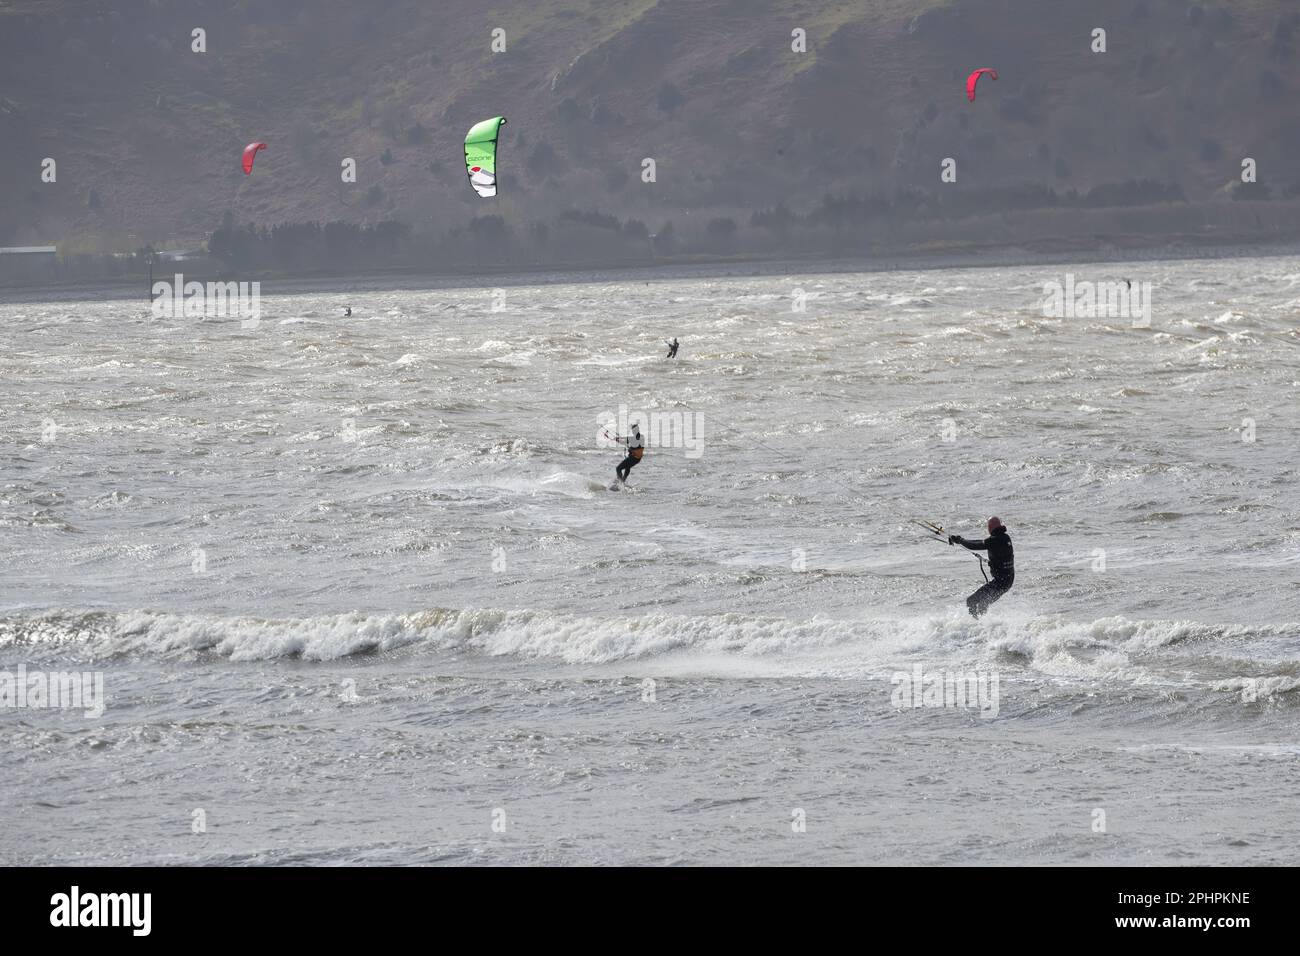 Kitesurfers enjoying the thrills of surfing in windy and choppy seas off Llandudno's west shore in challenging conditions Stock Photo